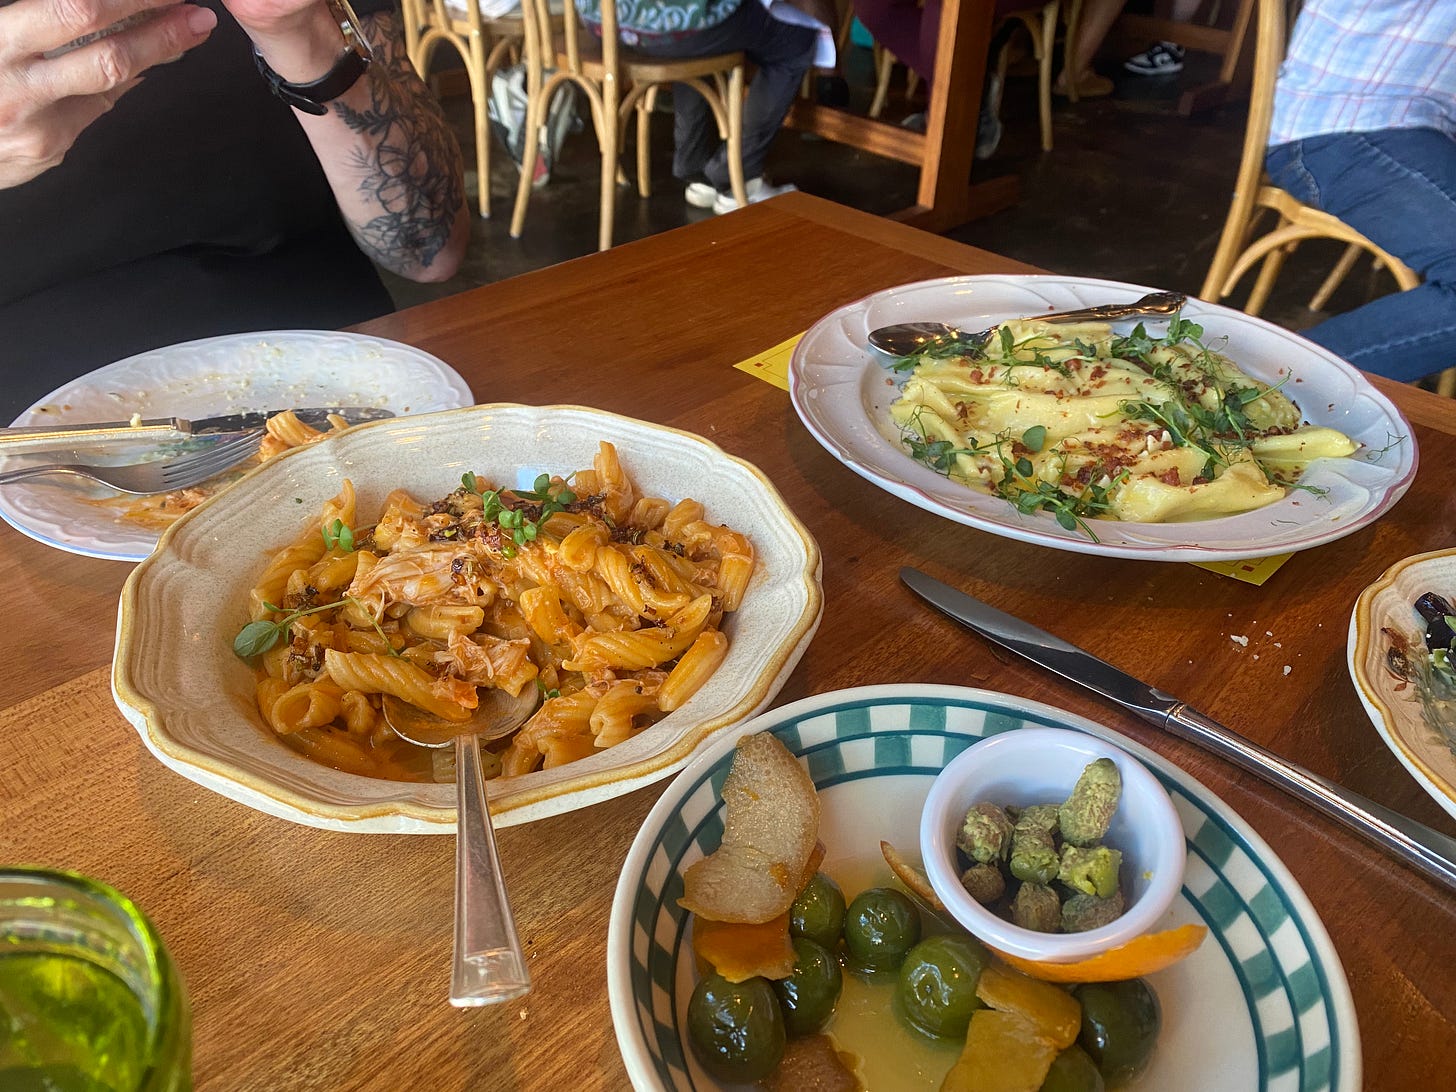 Several mismatched serving plates on a wood table, with side plates and utensils around. One has some castelvetrano olives with orange zest, some of the pits in a little dish. Another has the dungeness crab garganelli alla vodka, and the furthest from the camera has the agnolotti carbonara, covered with pea shoots.